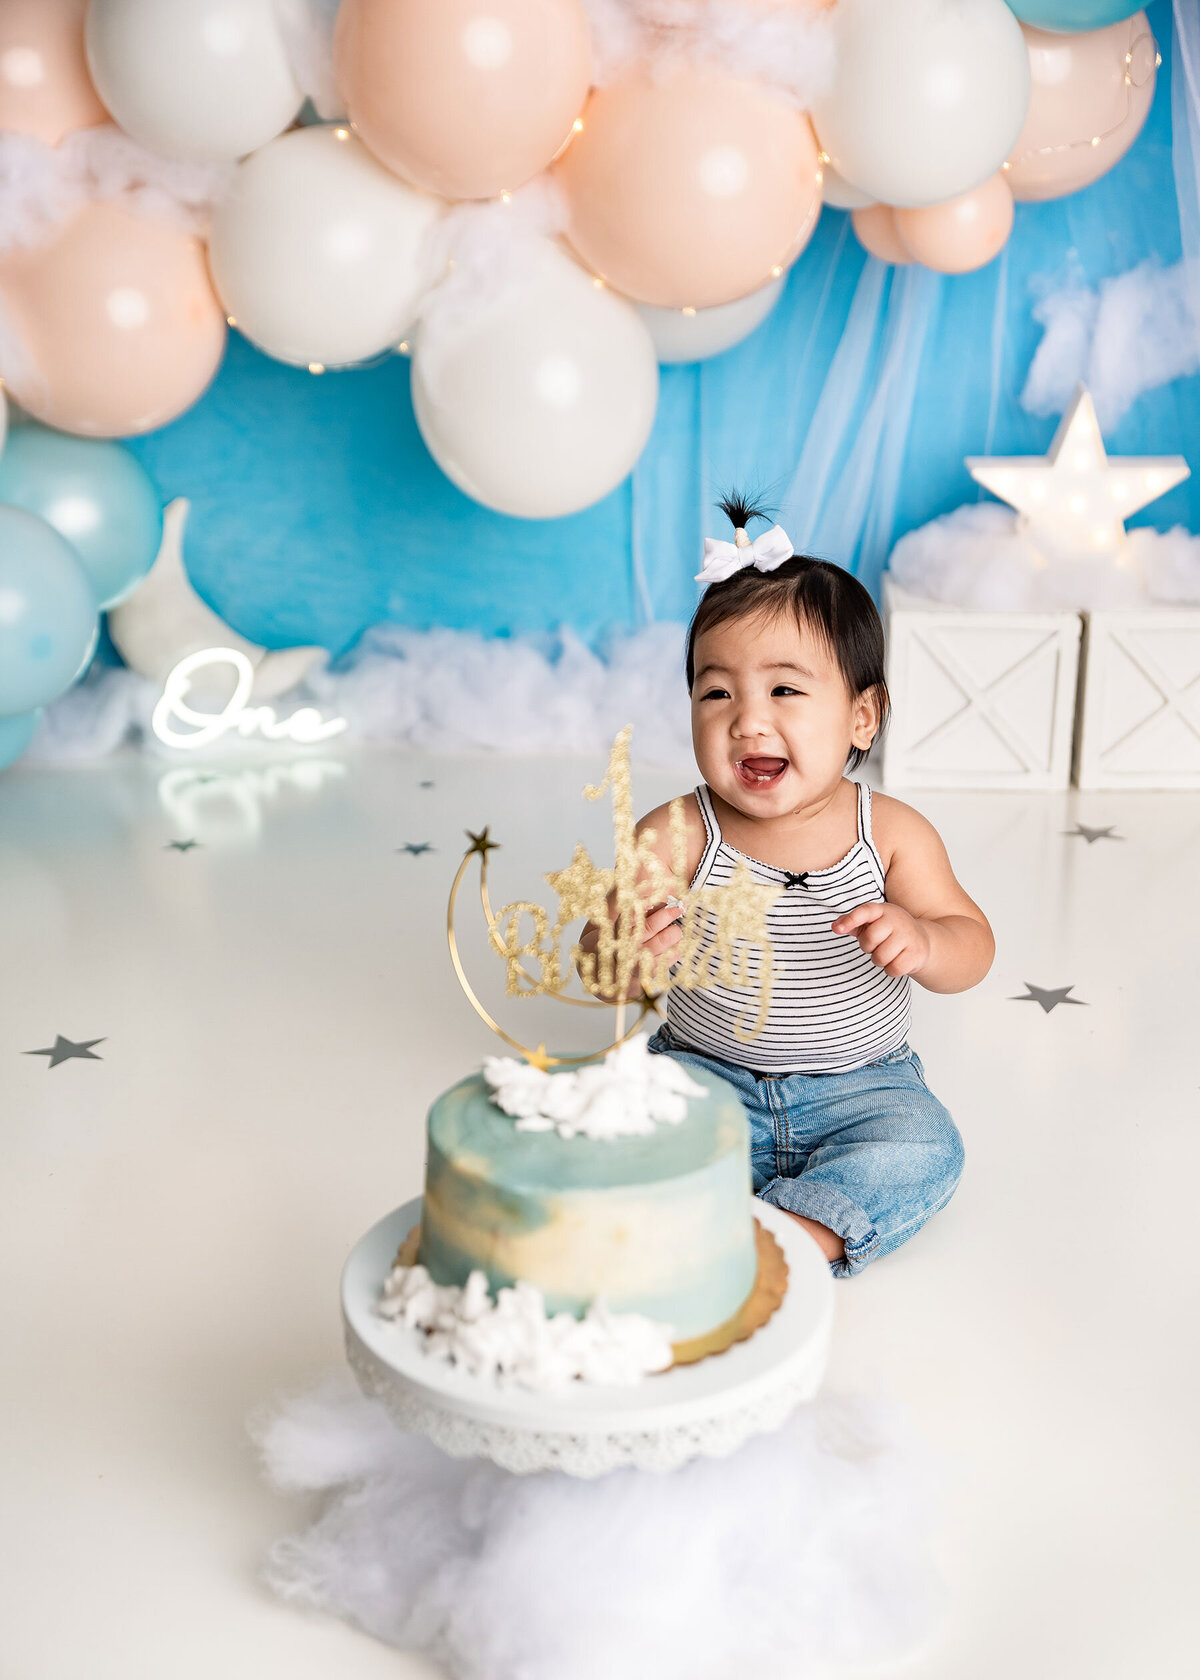 Lehigh-Valley-PA-Cake-Smash-Photographer-twinkle-twinkle-little-star-moon-and-star-cake